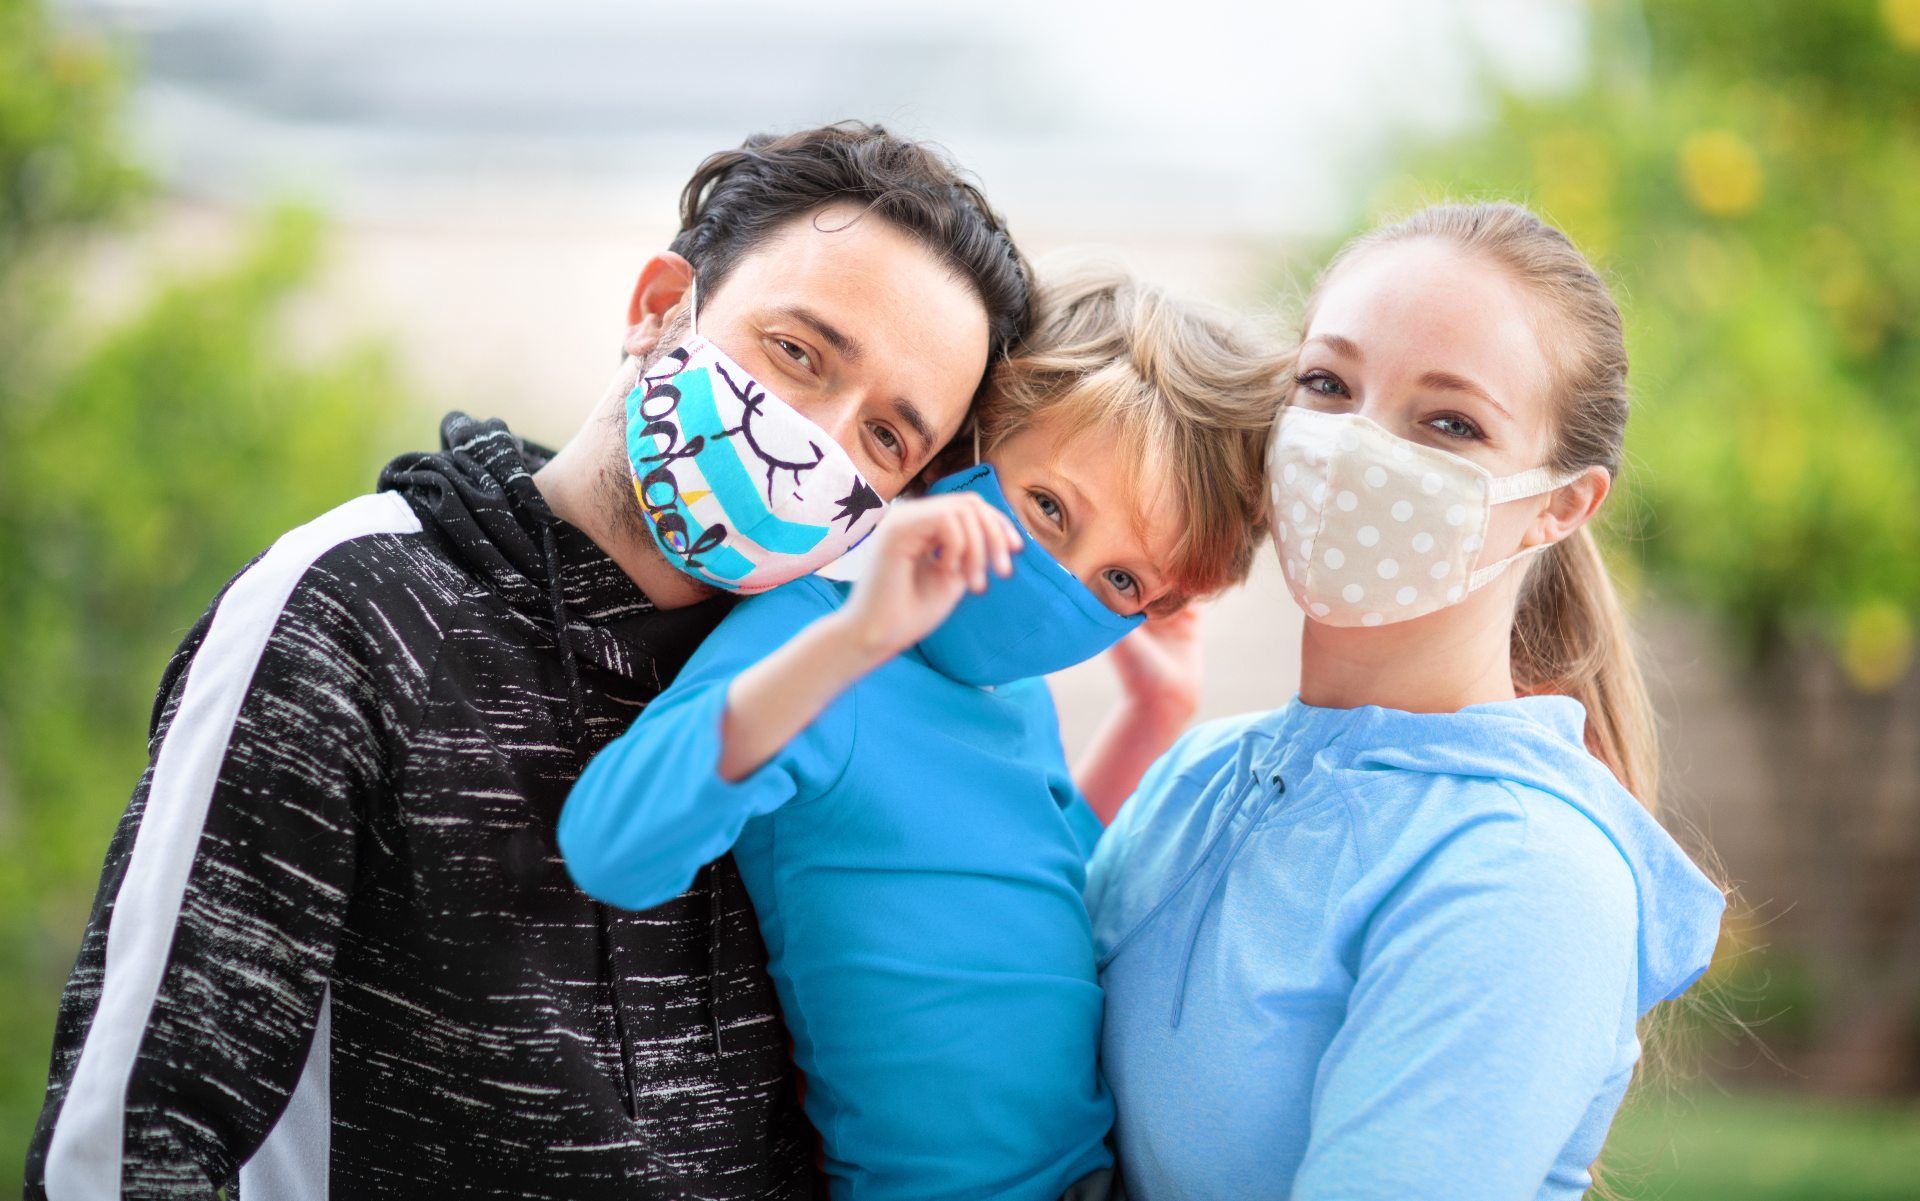 A man, woman and child wear face masks in various colors and patterns - sales tax